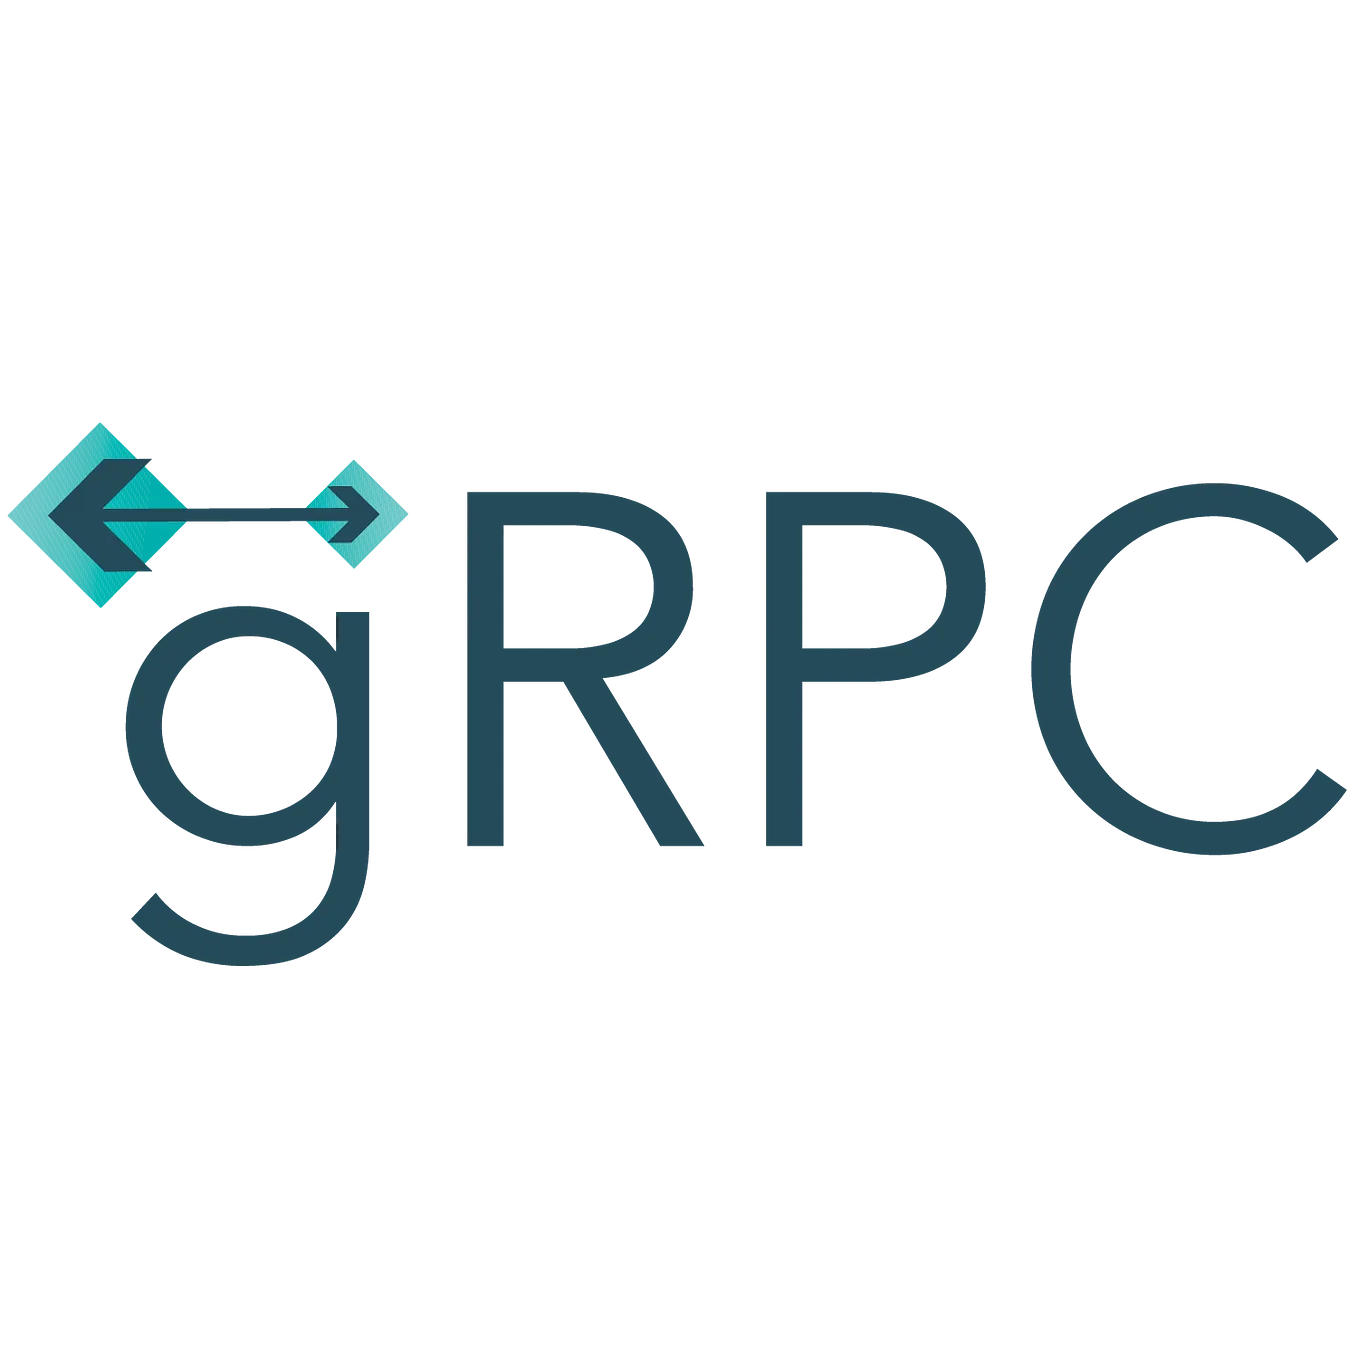 How To: Build a gRPC Server In Go